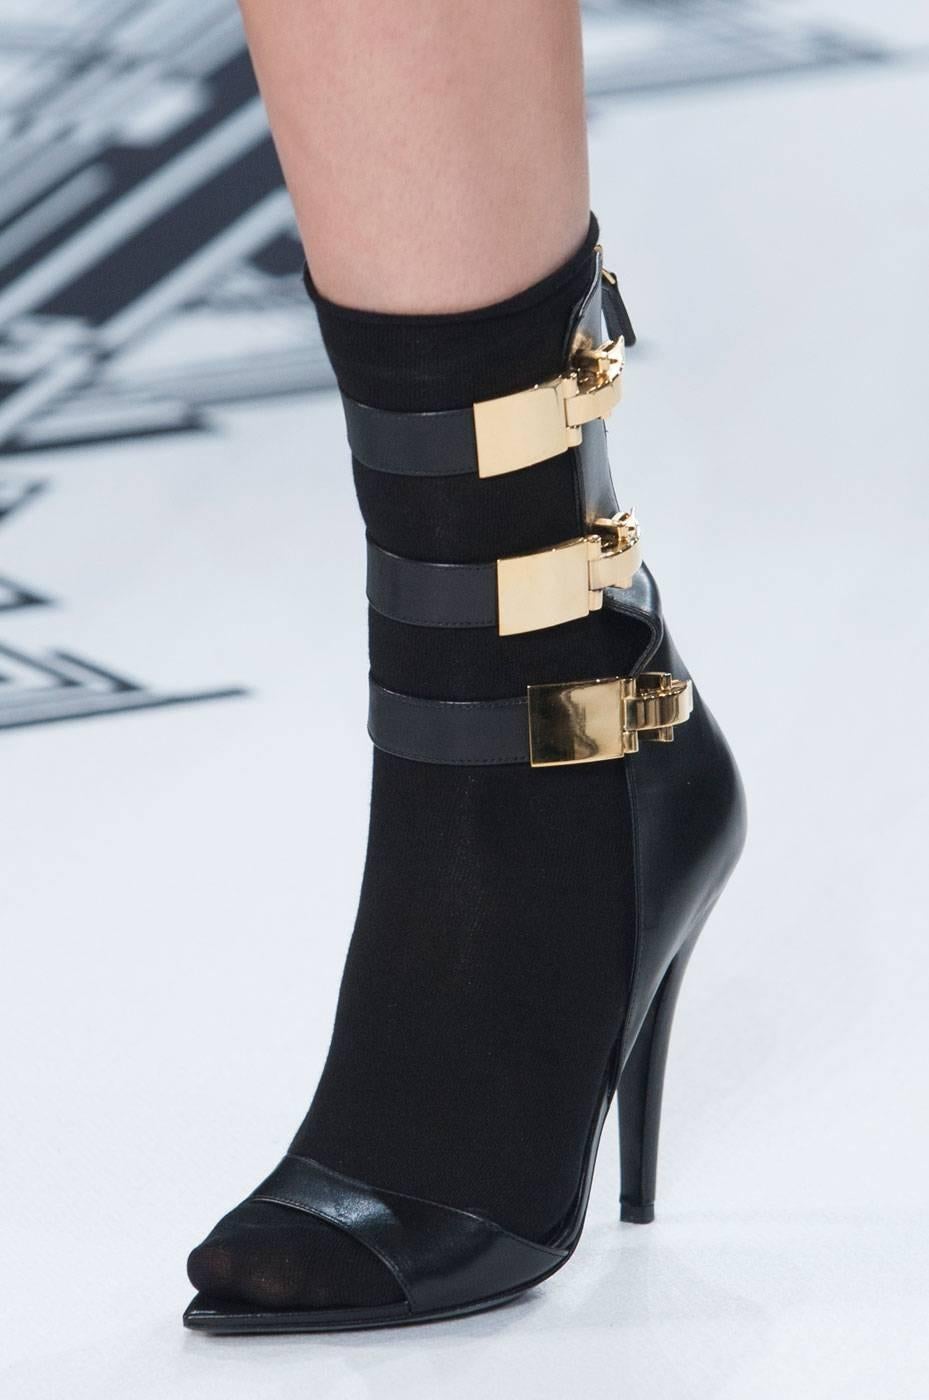 HOTTEST 

Versus Black Leather Calf-High Anthony Vaccarello Edition Sandals

Calf-hight buffed leather sandals in black. 

Pointed-toe. Gold-tone hardware. 

Decorative claps at straps. 

Zip-closure at heel counter.
 
Approx. 4 heel. 

Part of the